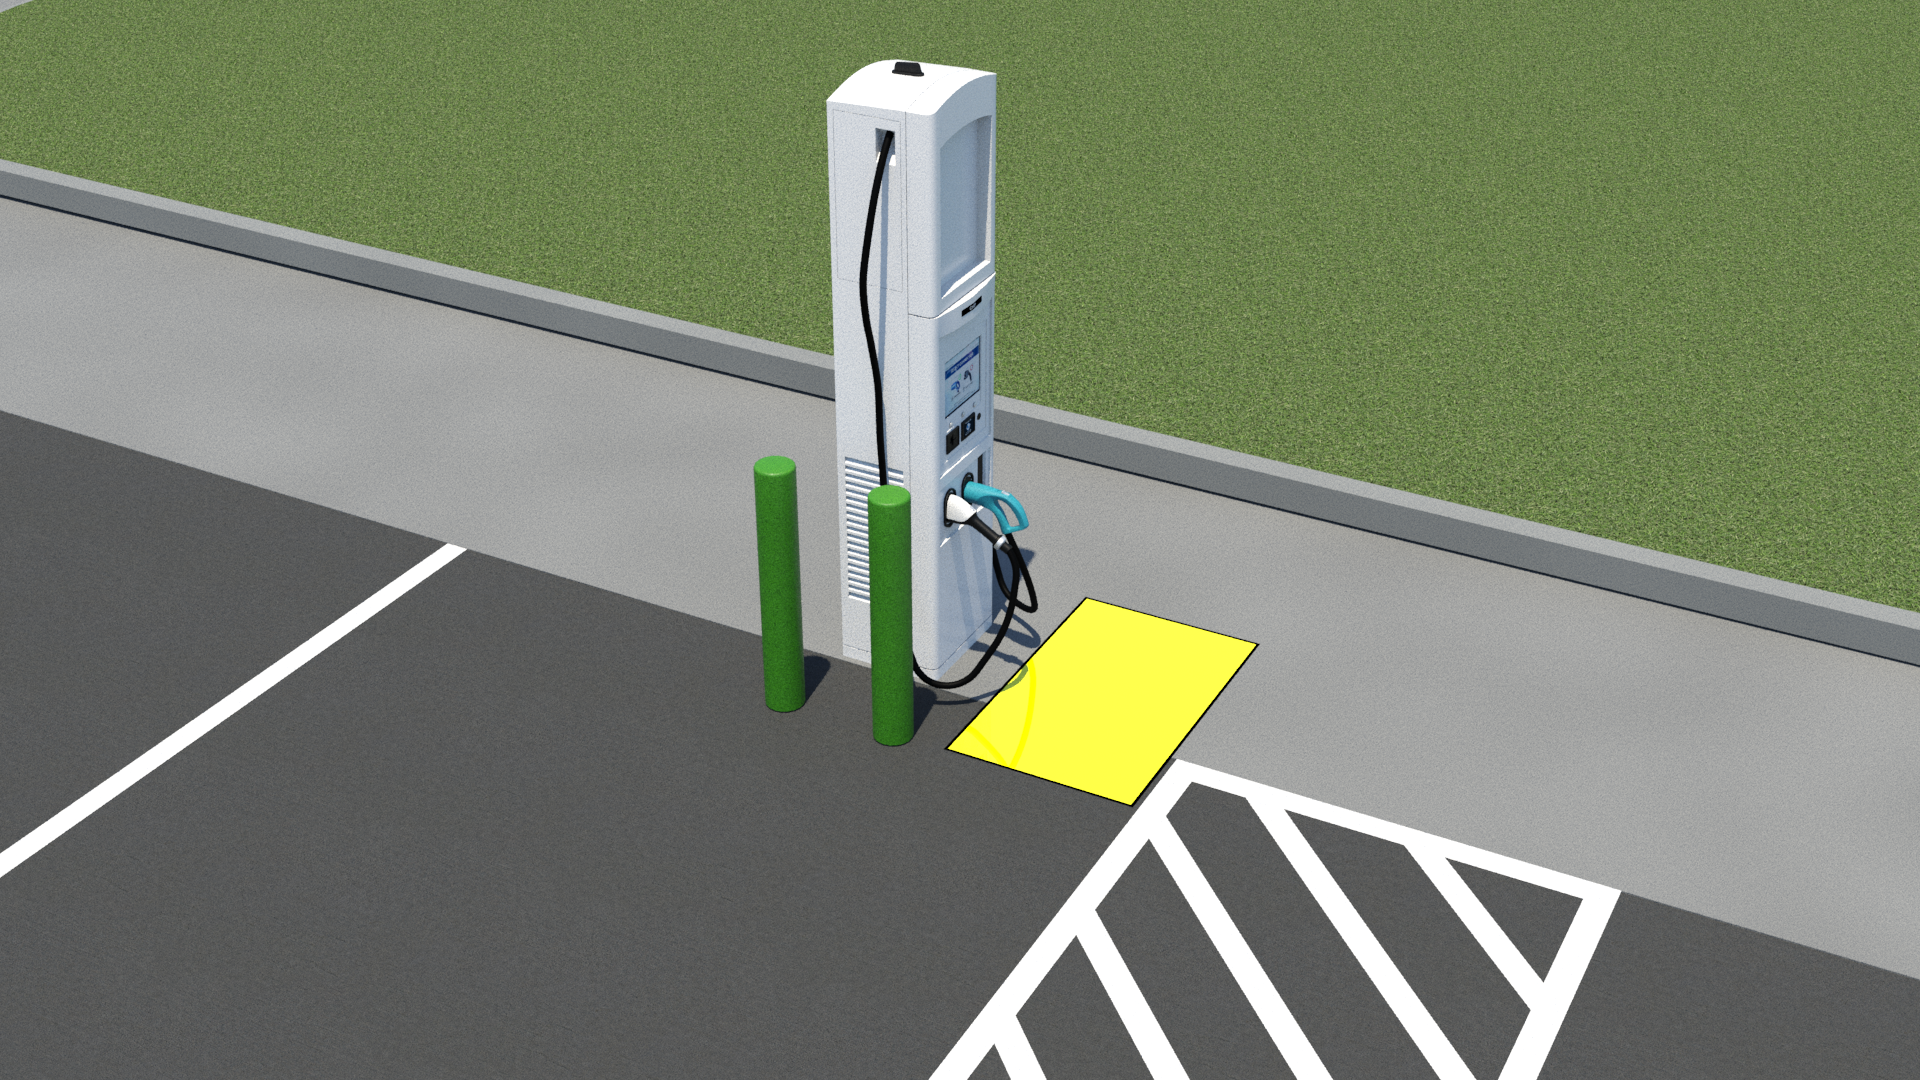 2 green bollards protect side of EV charger which has been rotated so front of EV charger faces access aisle on the right side of the charging space. Yellow rectangle in front of EV charger controls indicates clear floor space. EV charger is placed at center of the vehicle charging space on a flush sidewalk